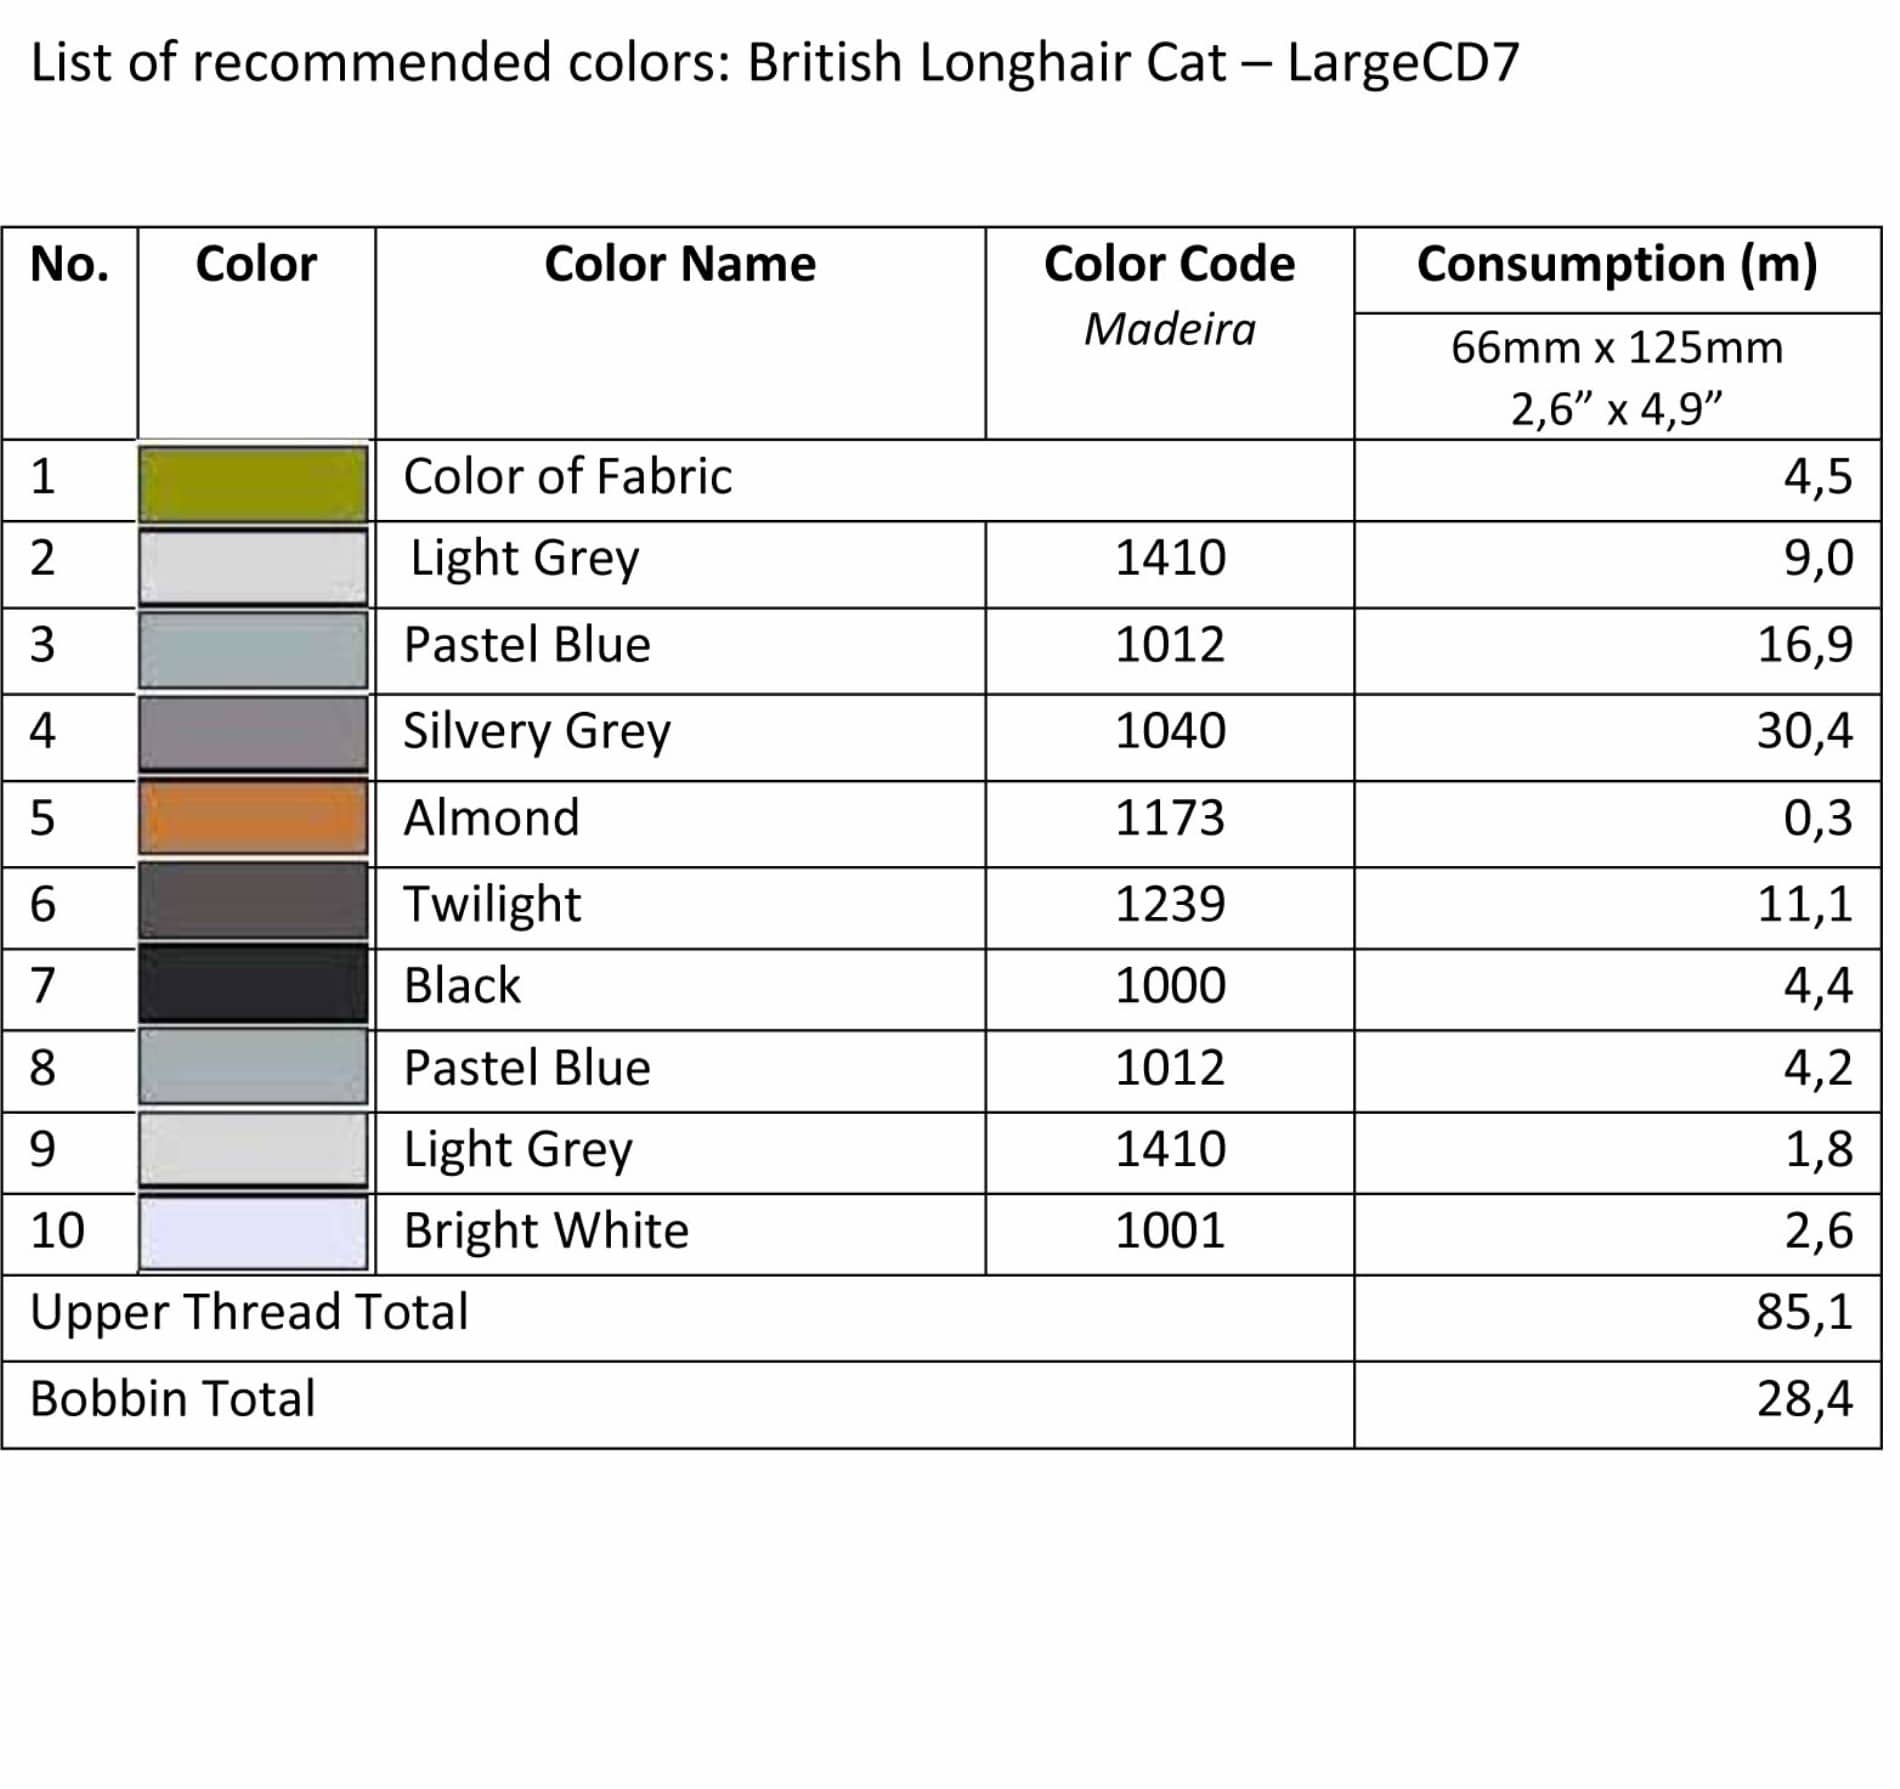 List of recommended colors - LargeCD7